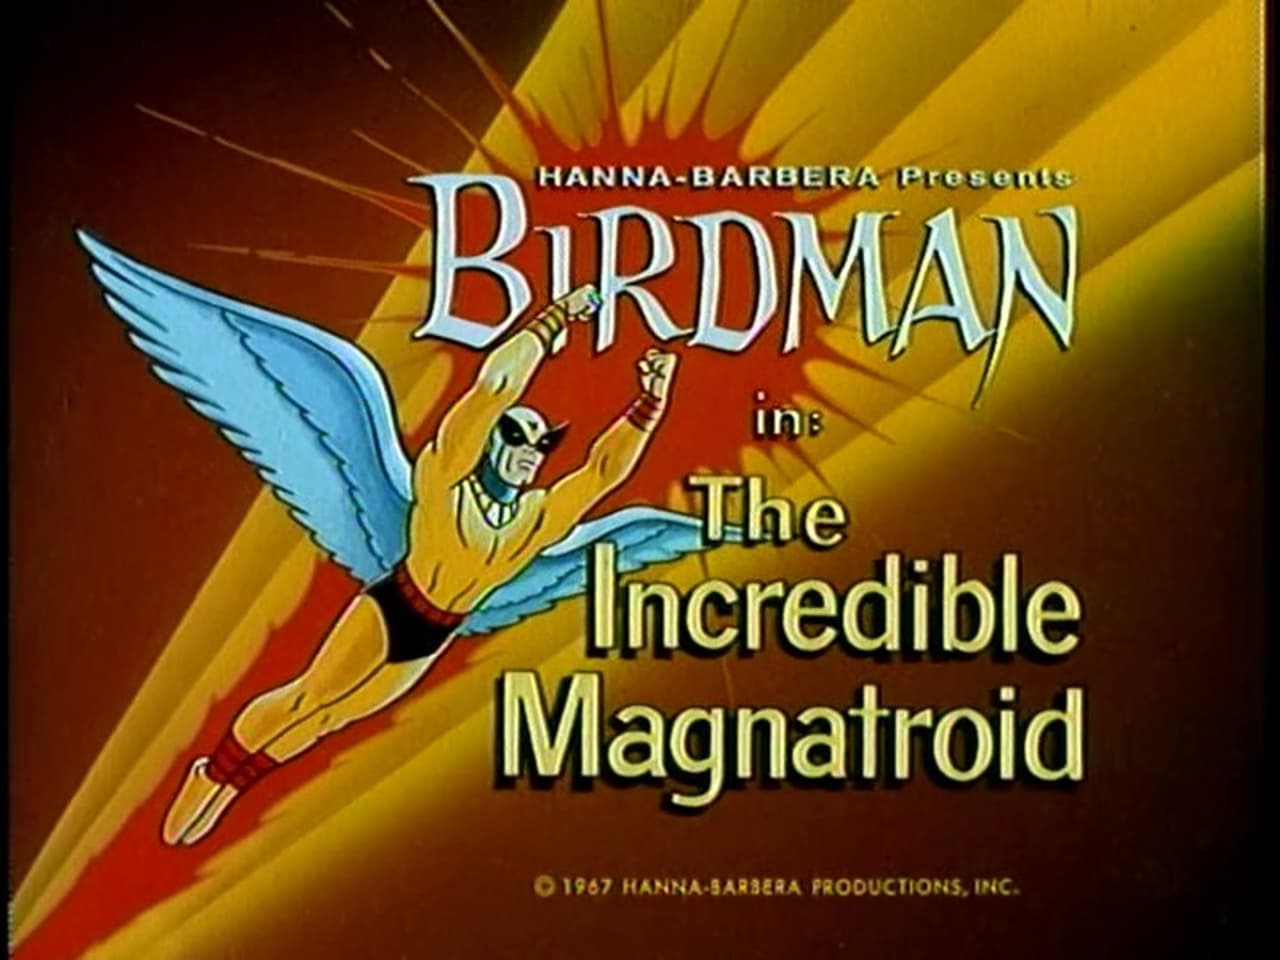 The Incredible Magnatroid